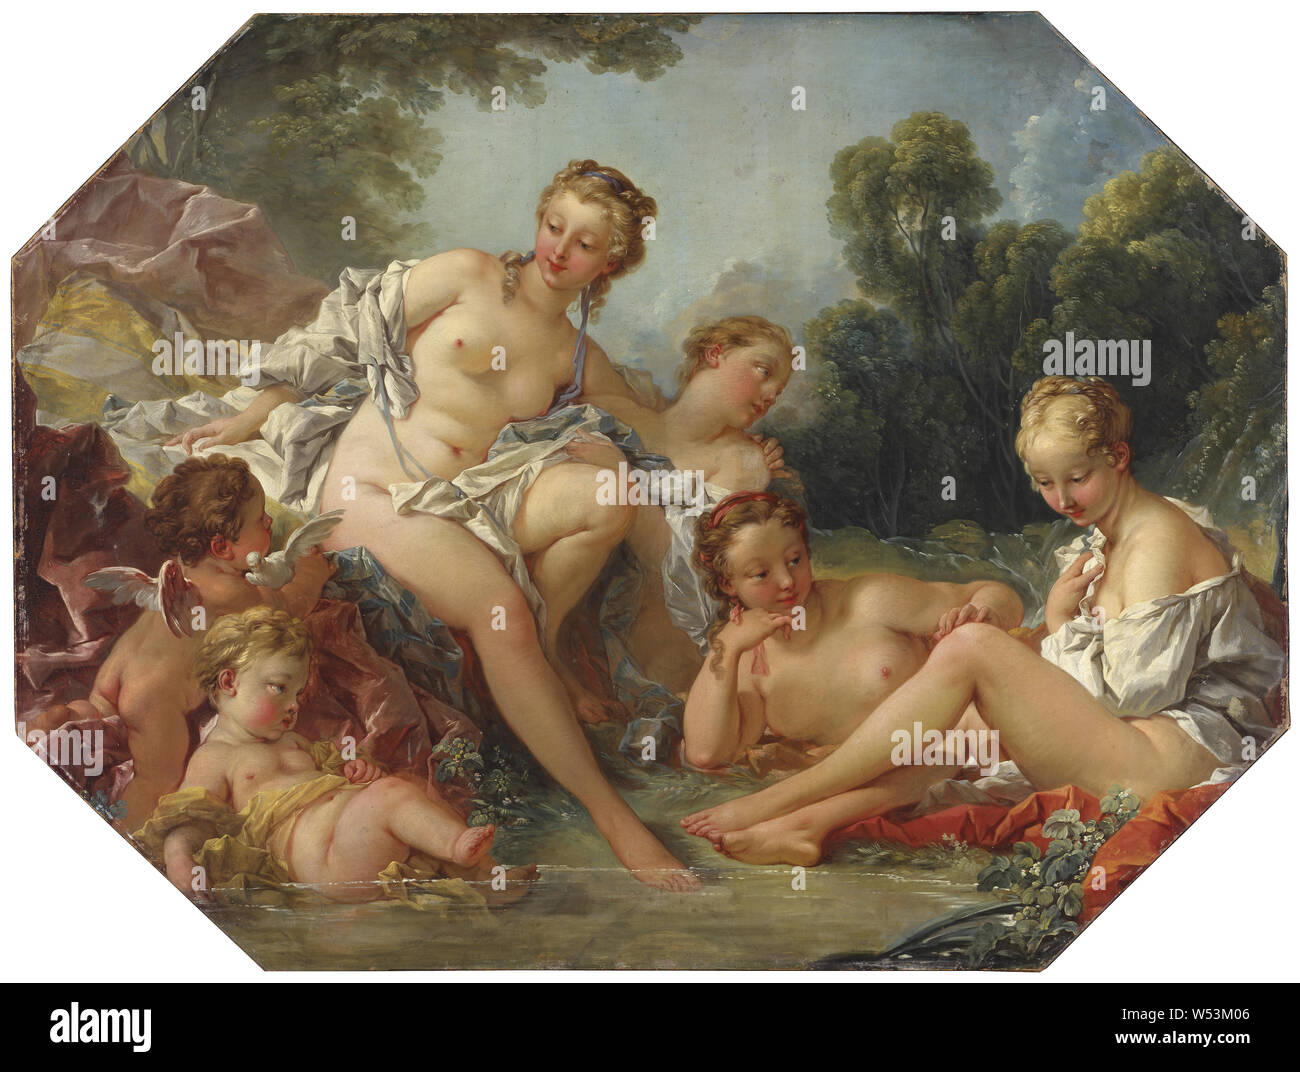 François Boucher, Venus in here Bath surrounded by Nymphs and Cupids, Venus in the bath surrounded by nymphs and amorins, painting, Oil on canvas, Octagonal, Height, 111 cm (43.7 inches), Width, 147 cm (57.8 inches) Stock Photo